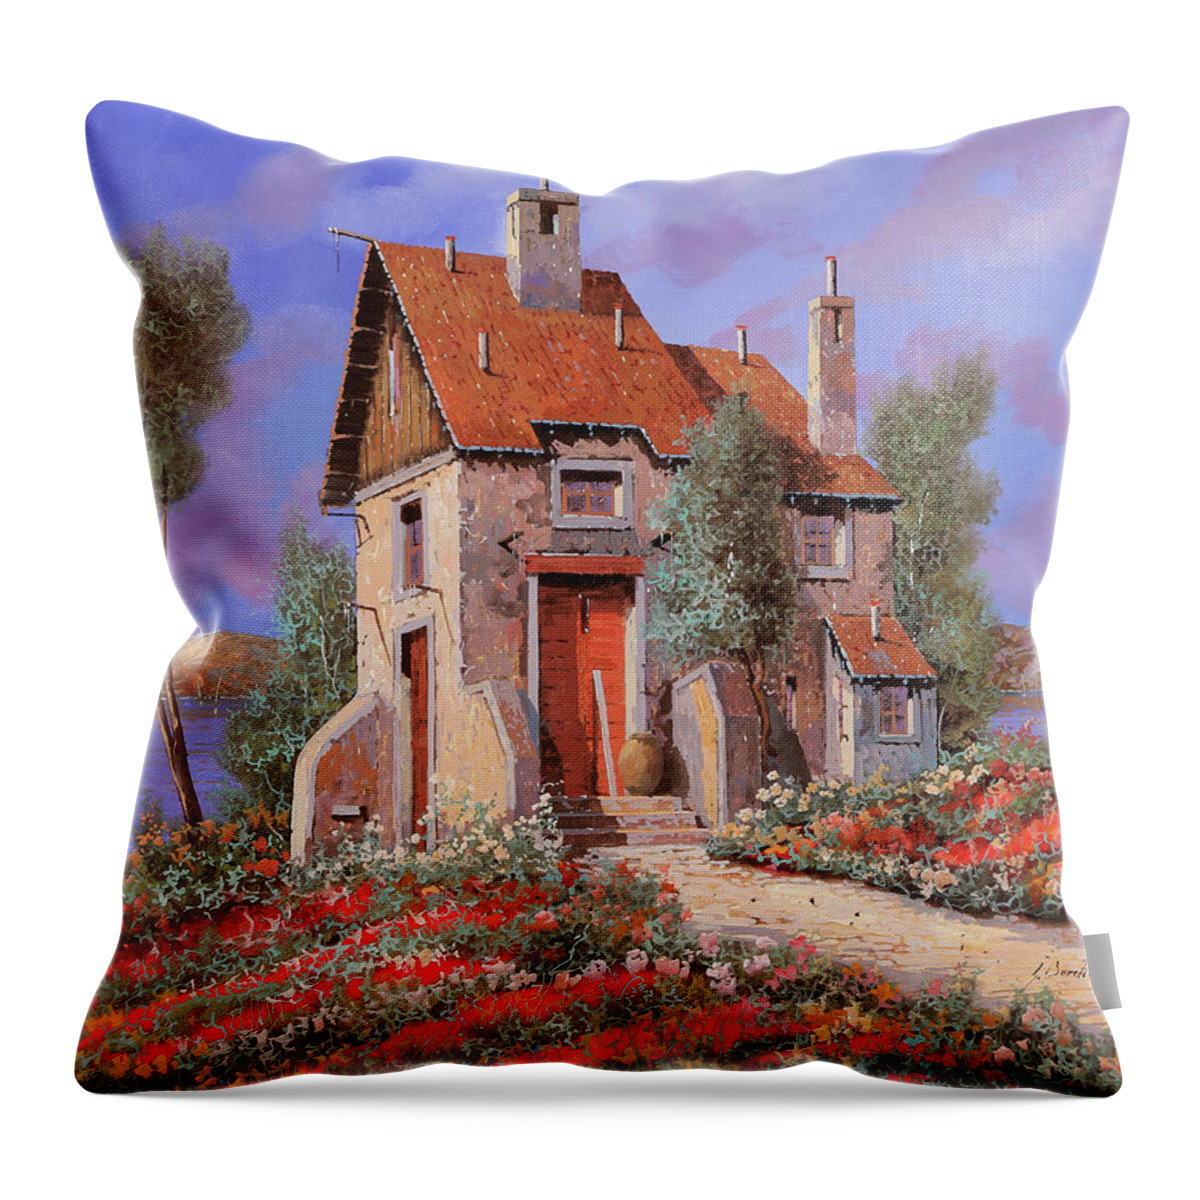 Lakescape Throw Pillow featuring the painting I Prati Rossi by Guido Borelli